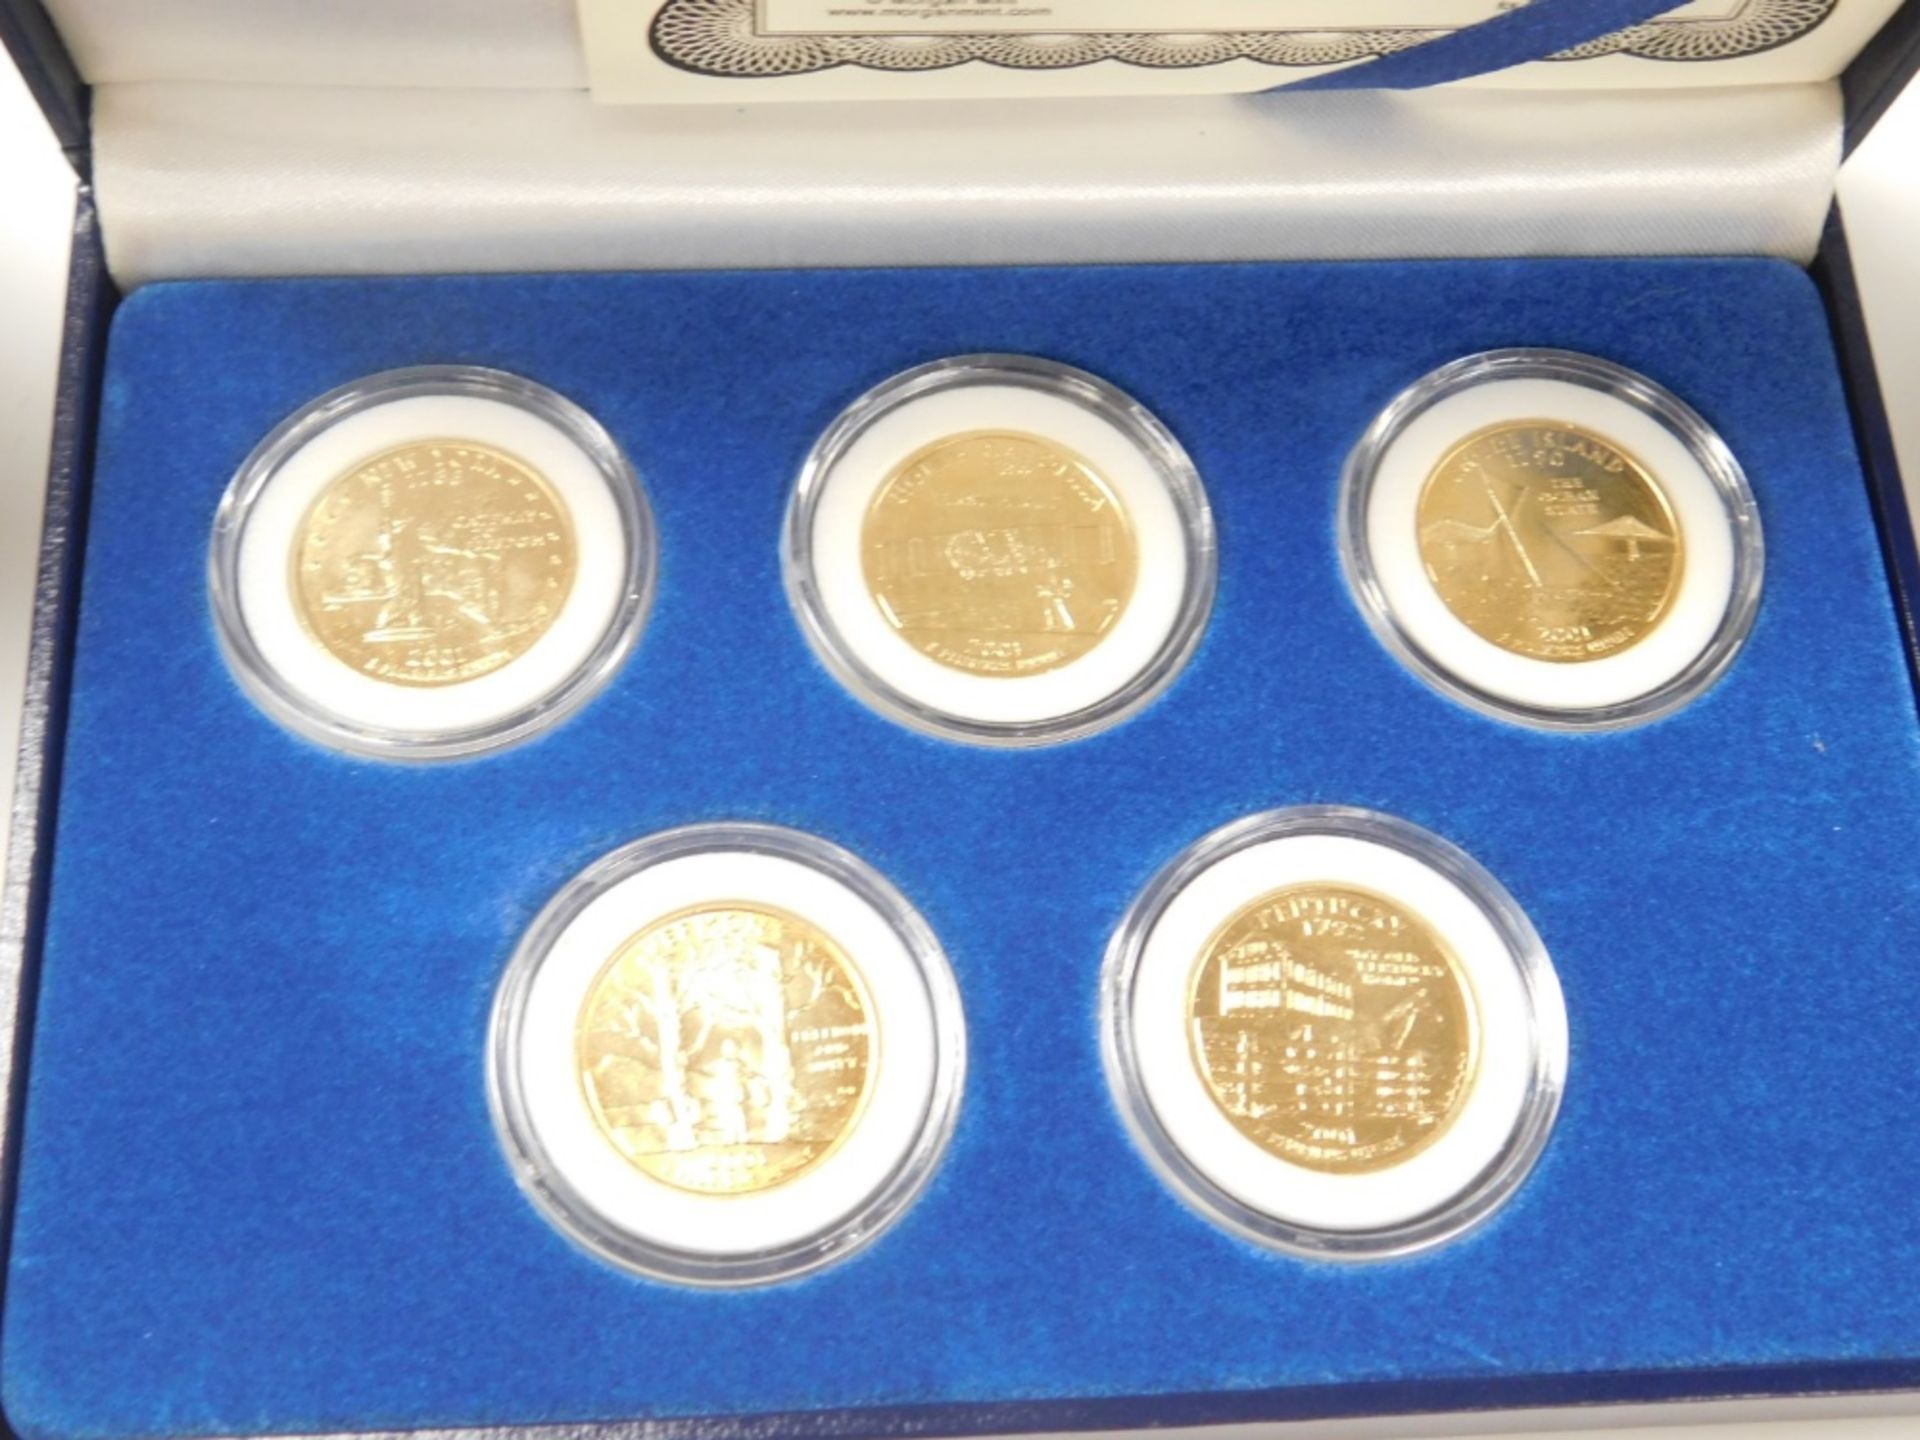 Five Statehood quarter dollars, the Morgan Mint, special edition, four sets, 2003, all boxed with ce - Image 3 of 6